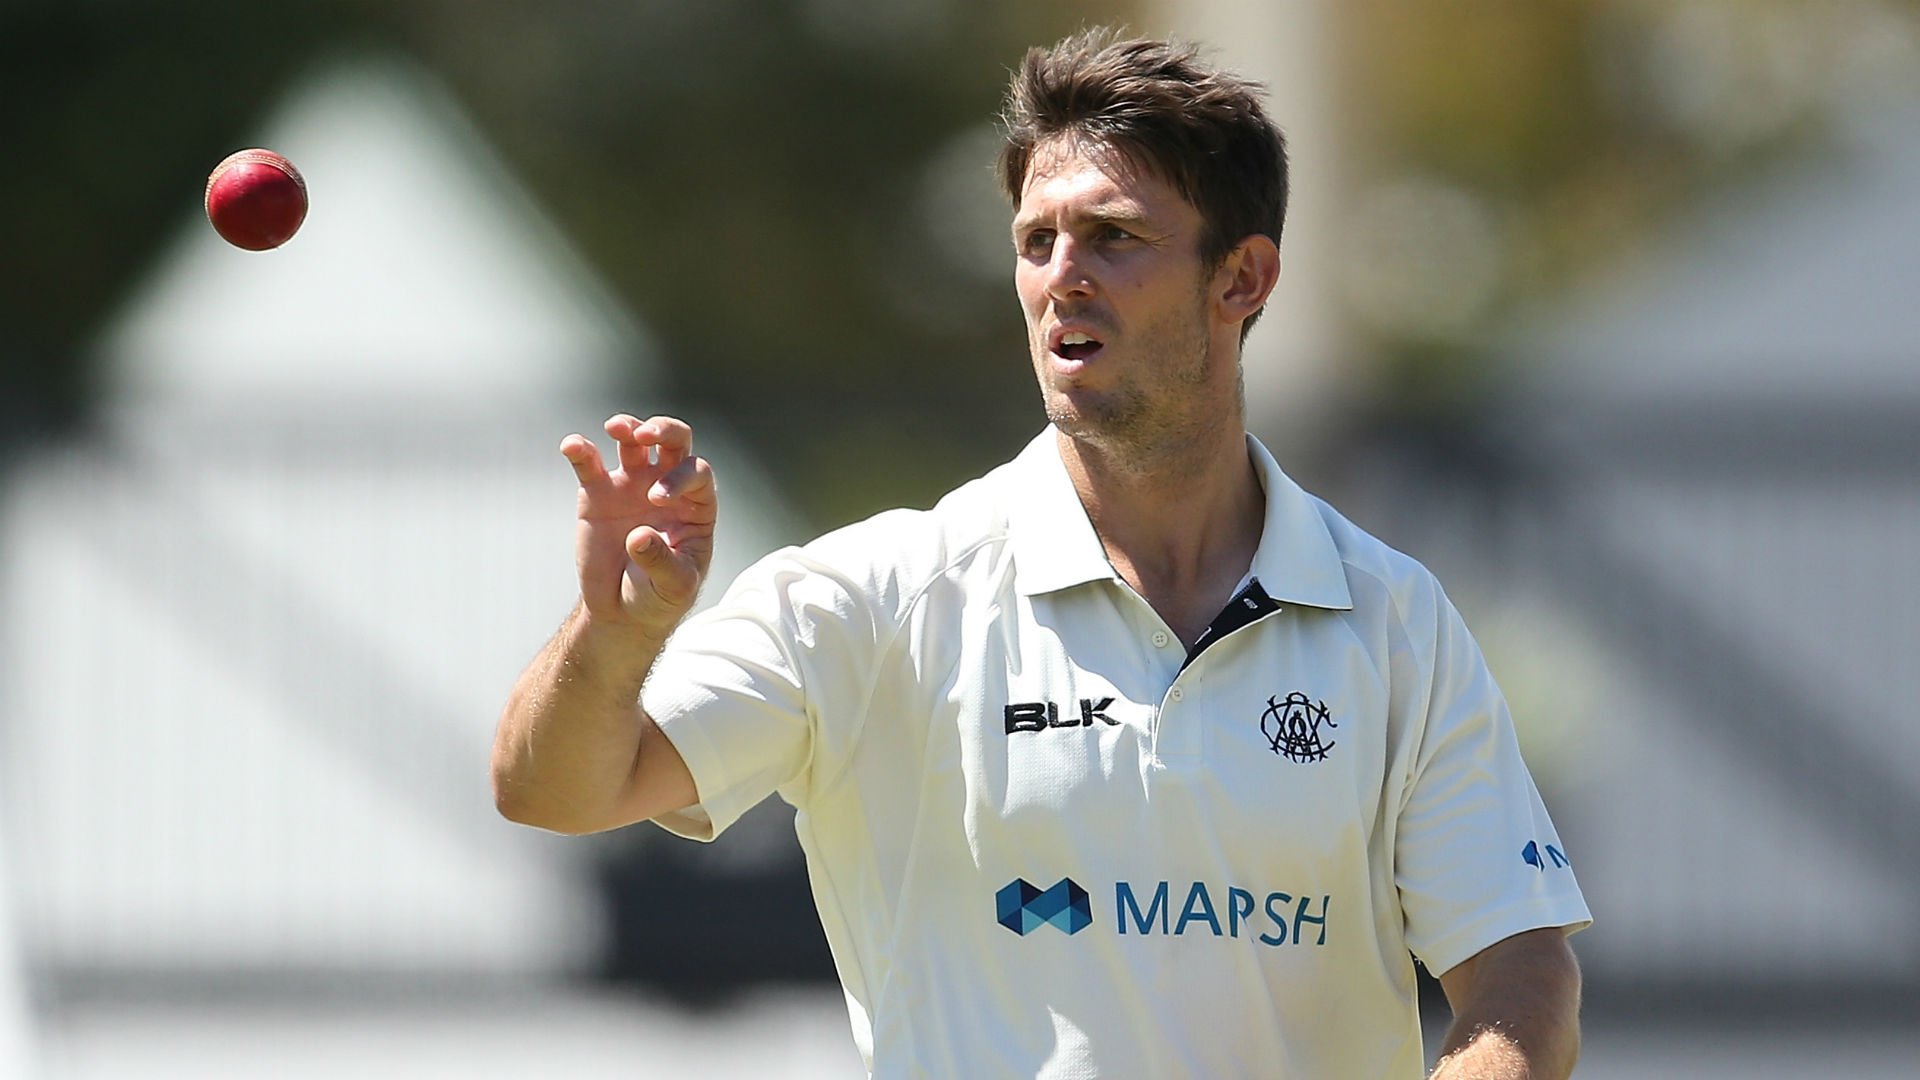 Australia all-rounder Mitchell Marsh says he will not be punching any more walls after learning a "good lesson" when breaking a finger.